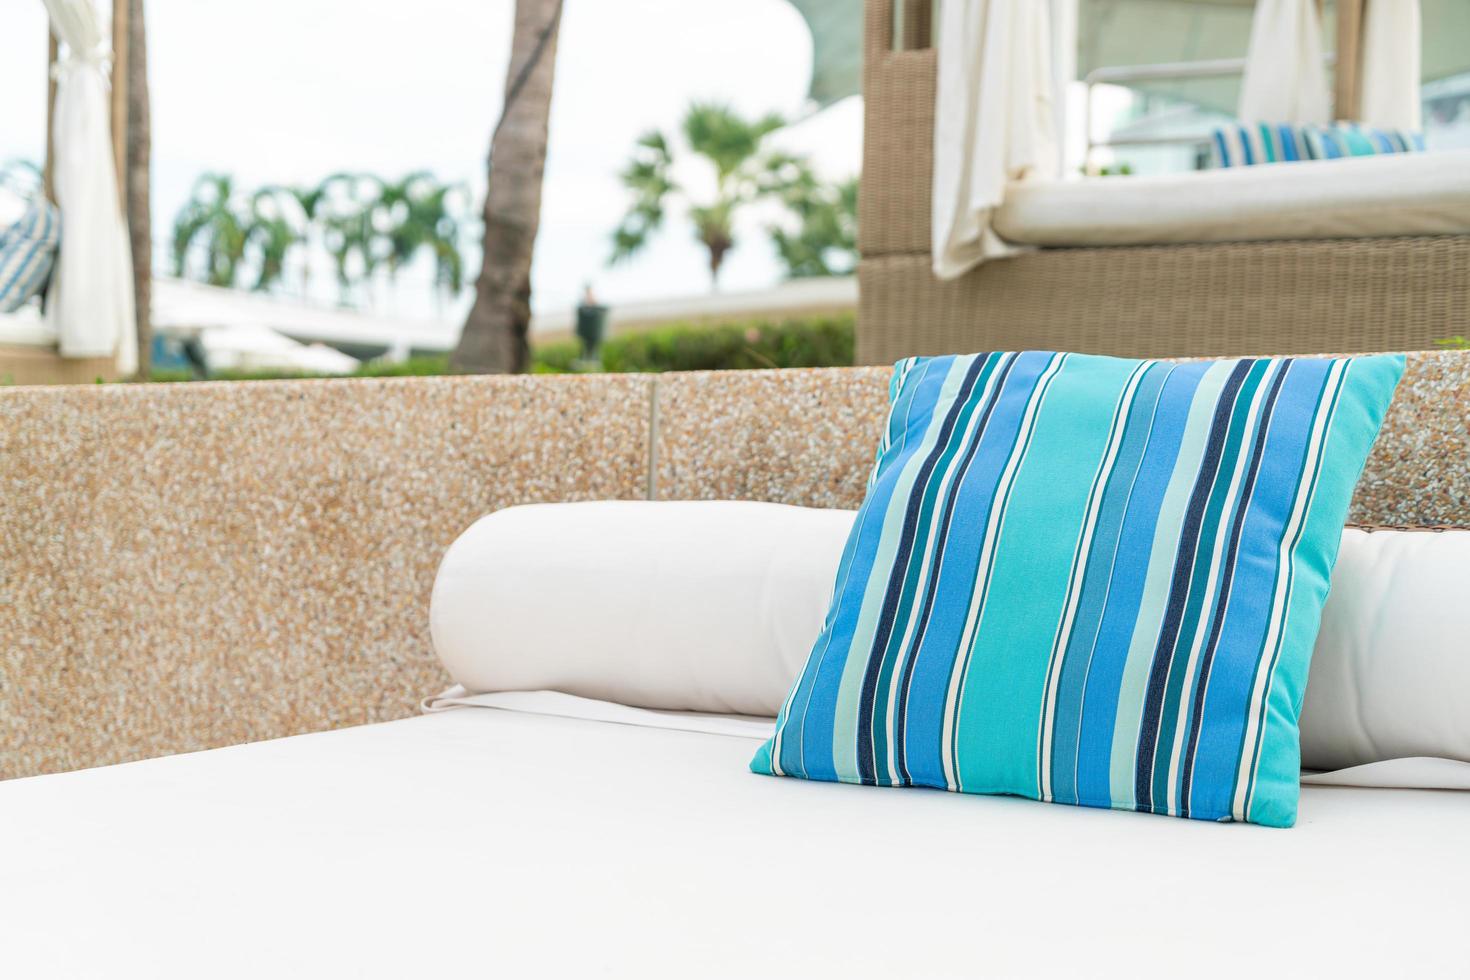 Comfortable pillow on pavilion near beach - travel and vacation concept photo